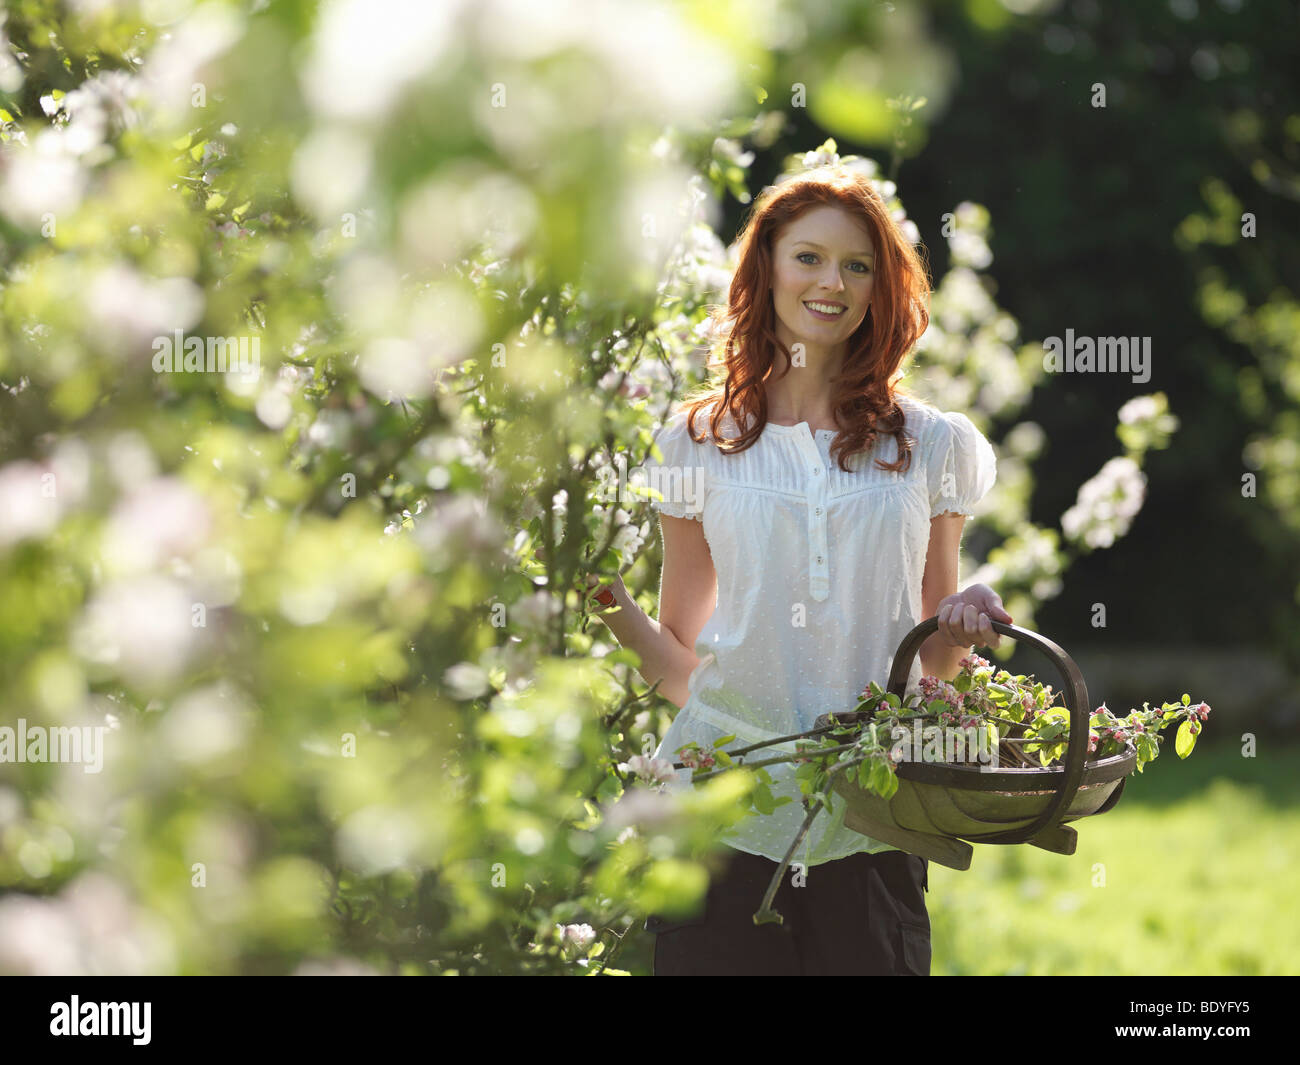 Woman With Apple Blossom In Orchard Stock Photo